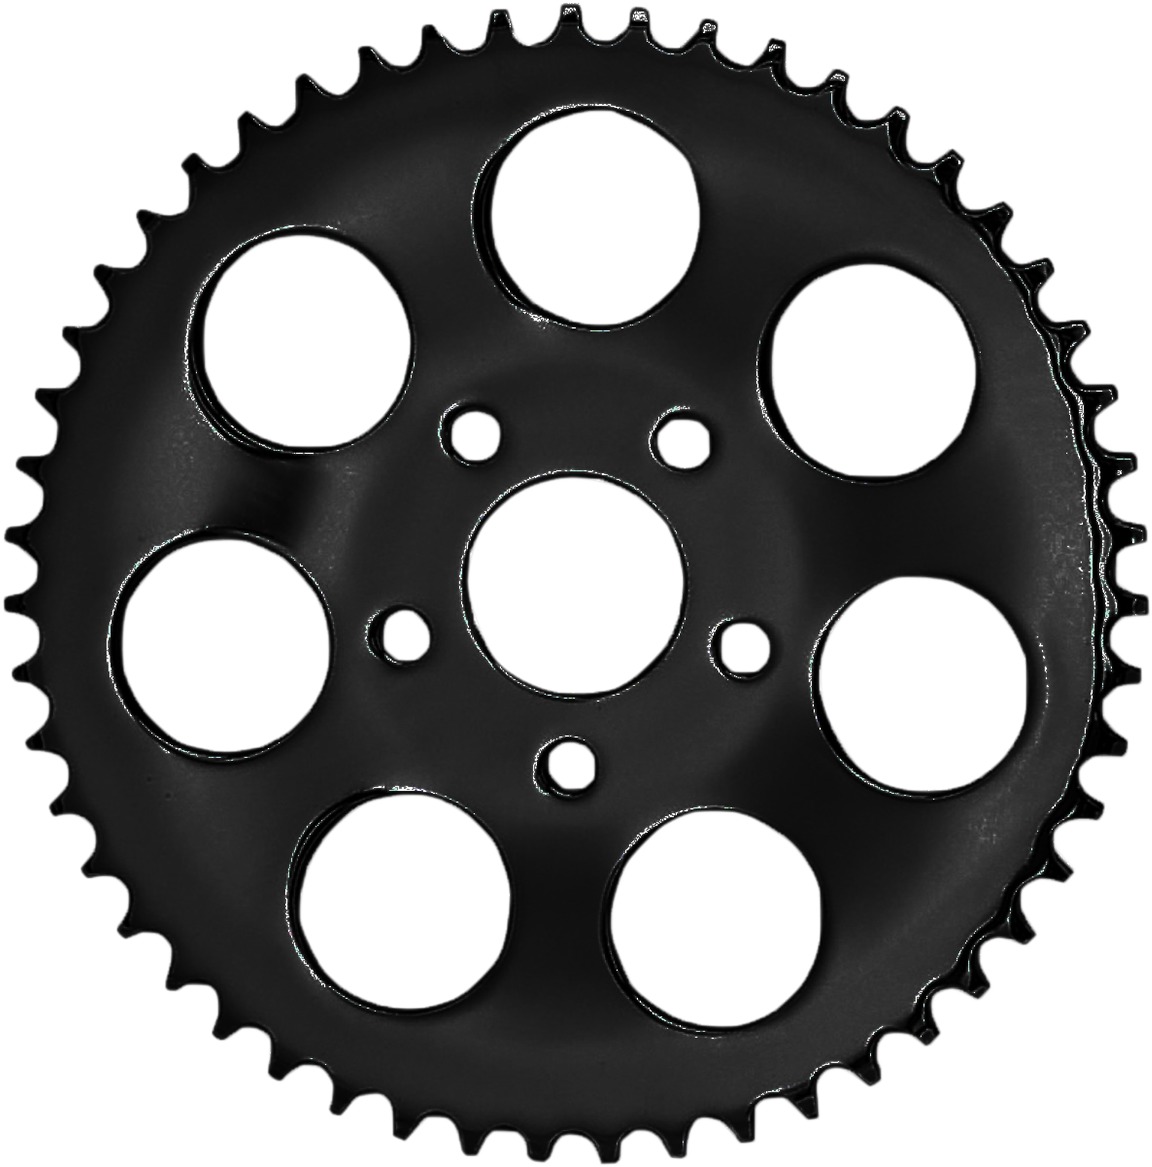 Carbon Steel 48T Drive Sprocket Gloss Black - For 86-92 Harley XL - Click Image to Close